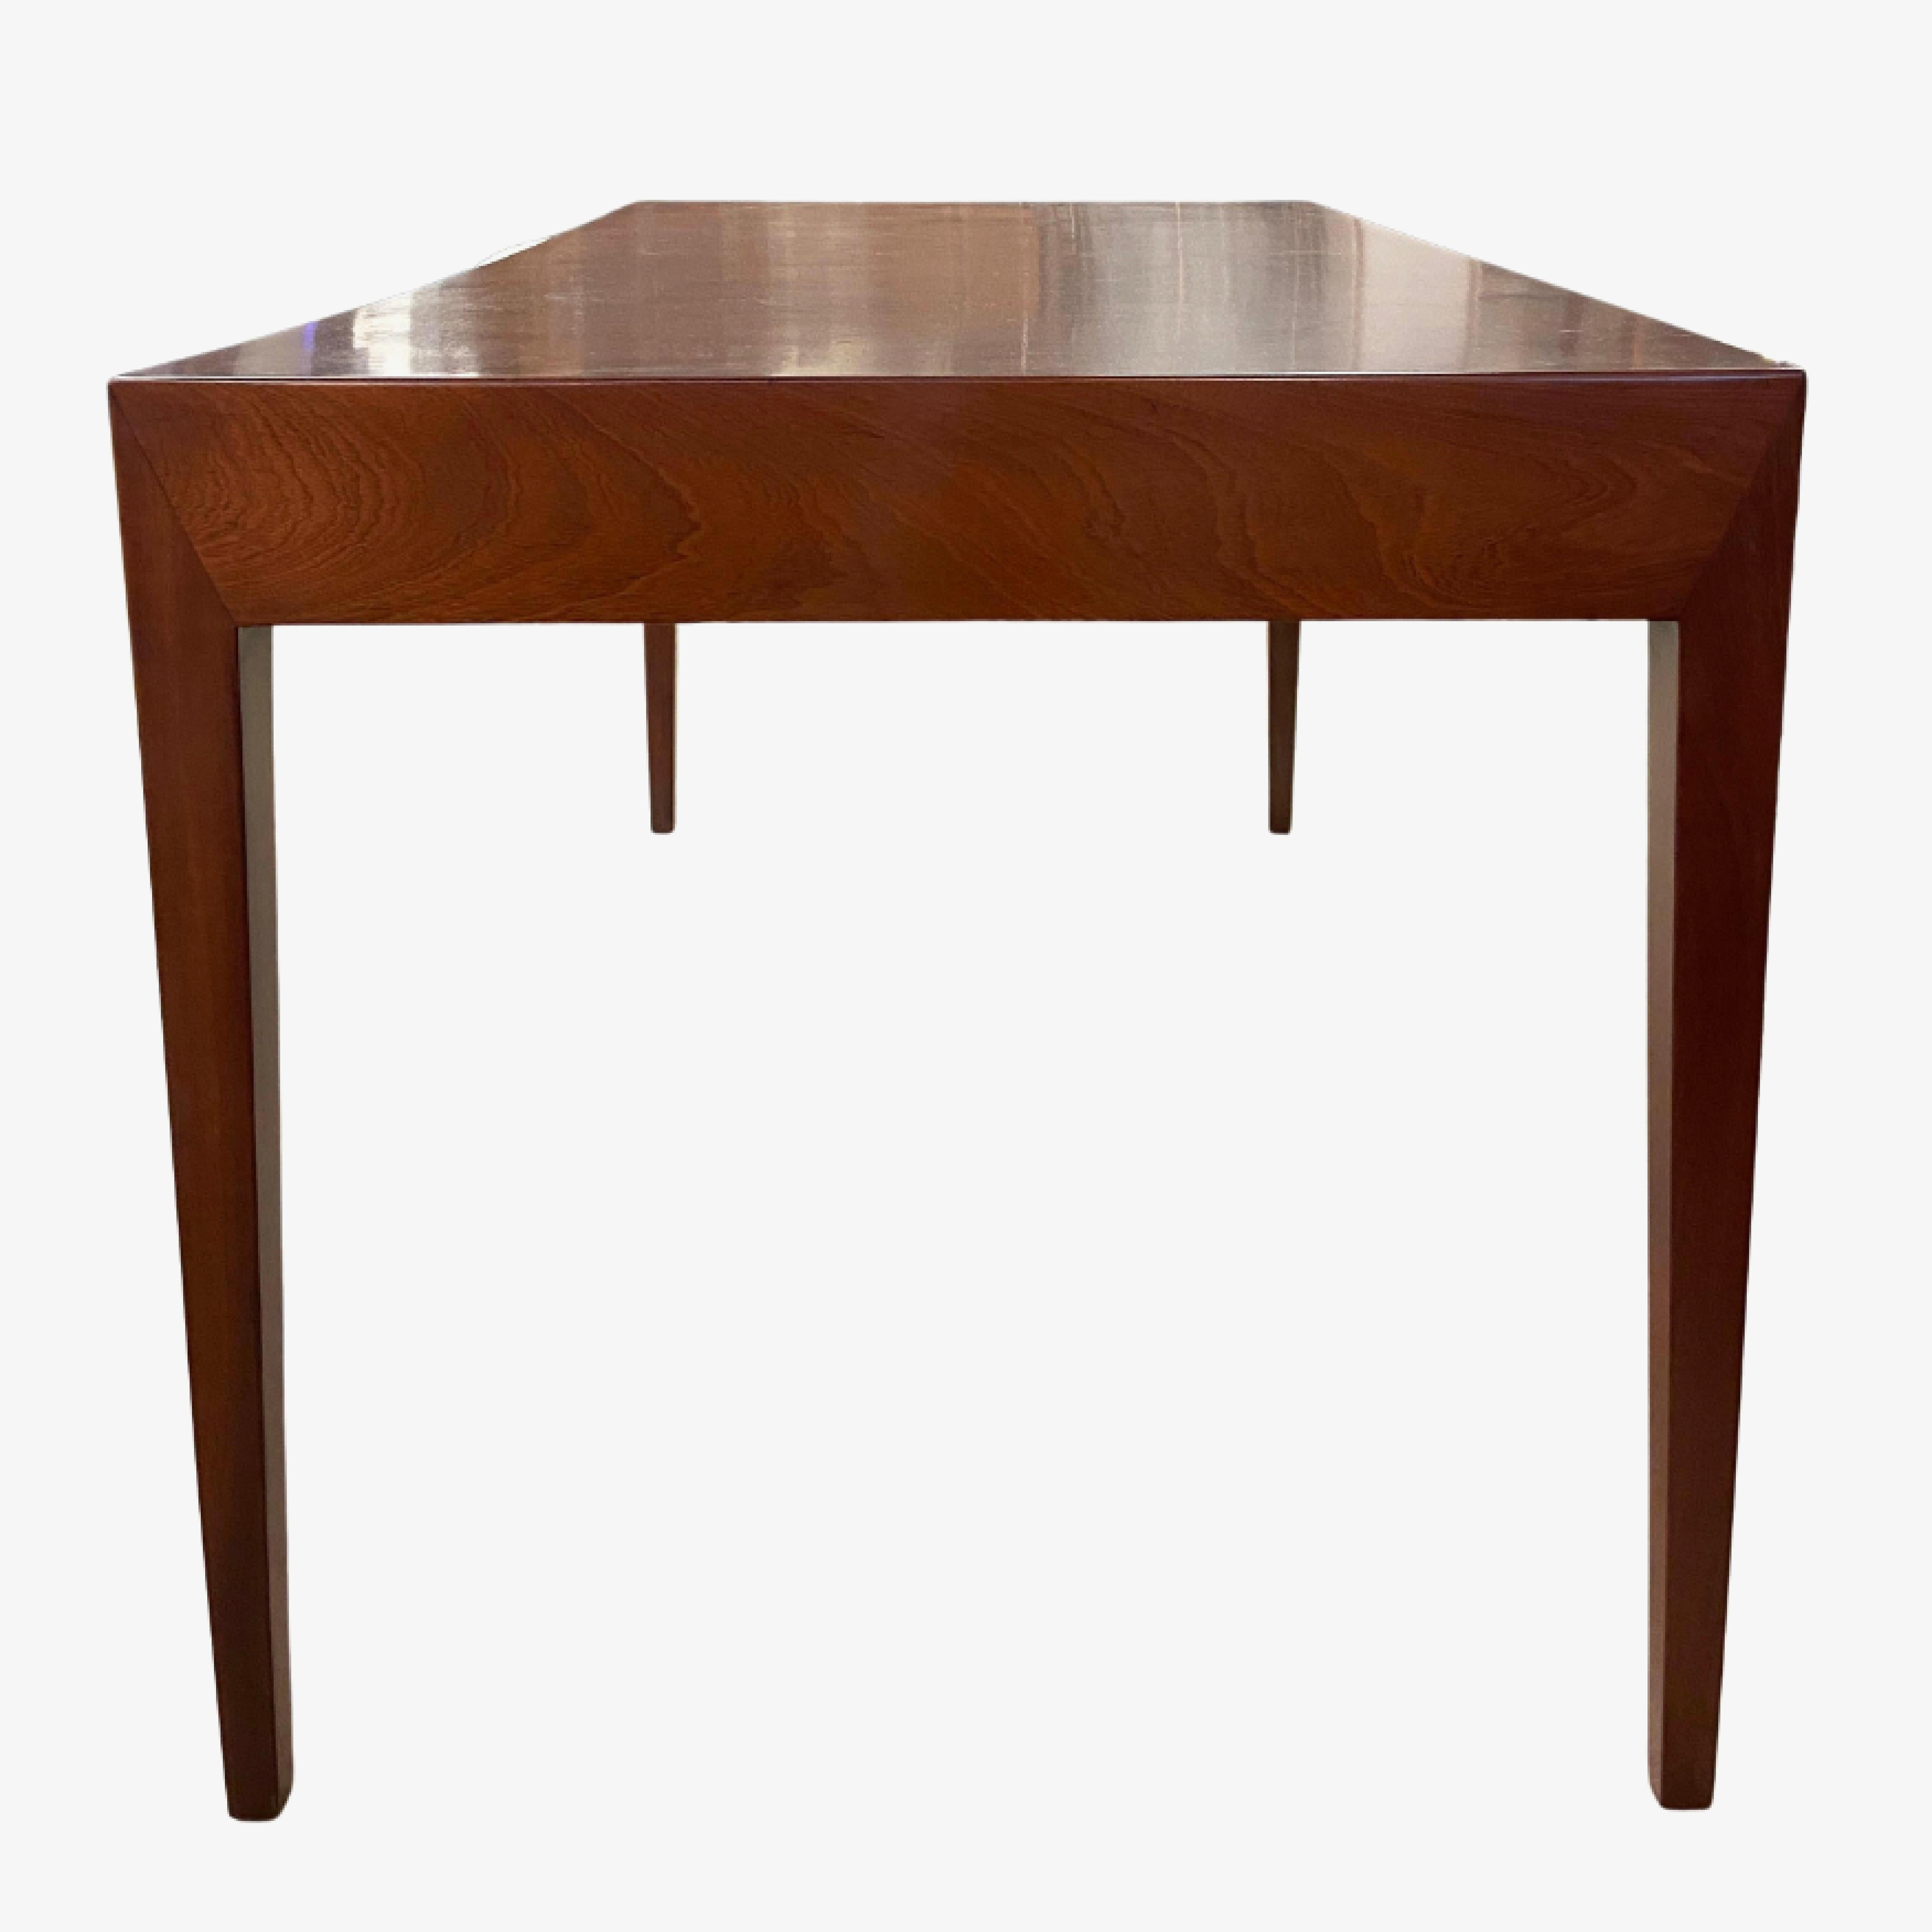 One of the most sought-after and recognized desks from the Danish Modern period, the Model 36 was designed by Danish designer Severin Hansen in 1958. This terrific writing desk in mahogany was procured directly from a Woodbridge, CT estate and